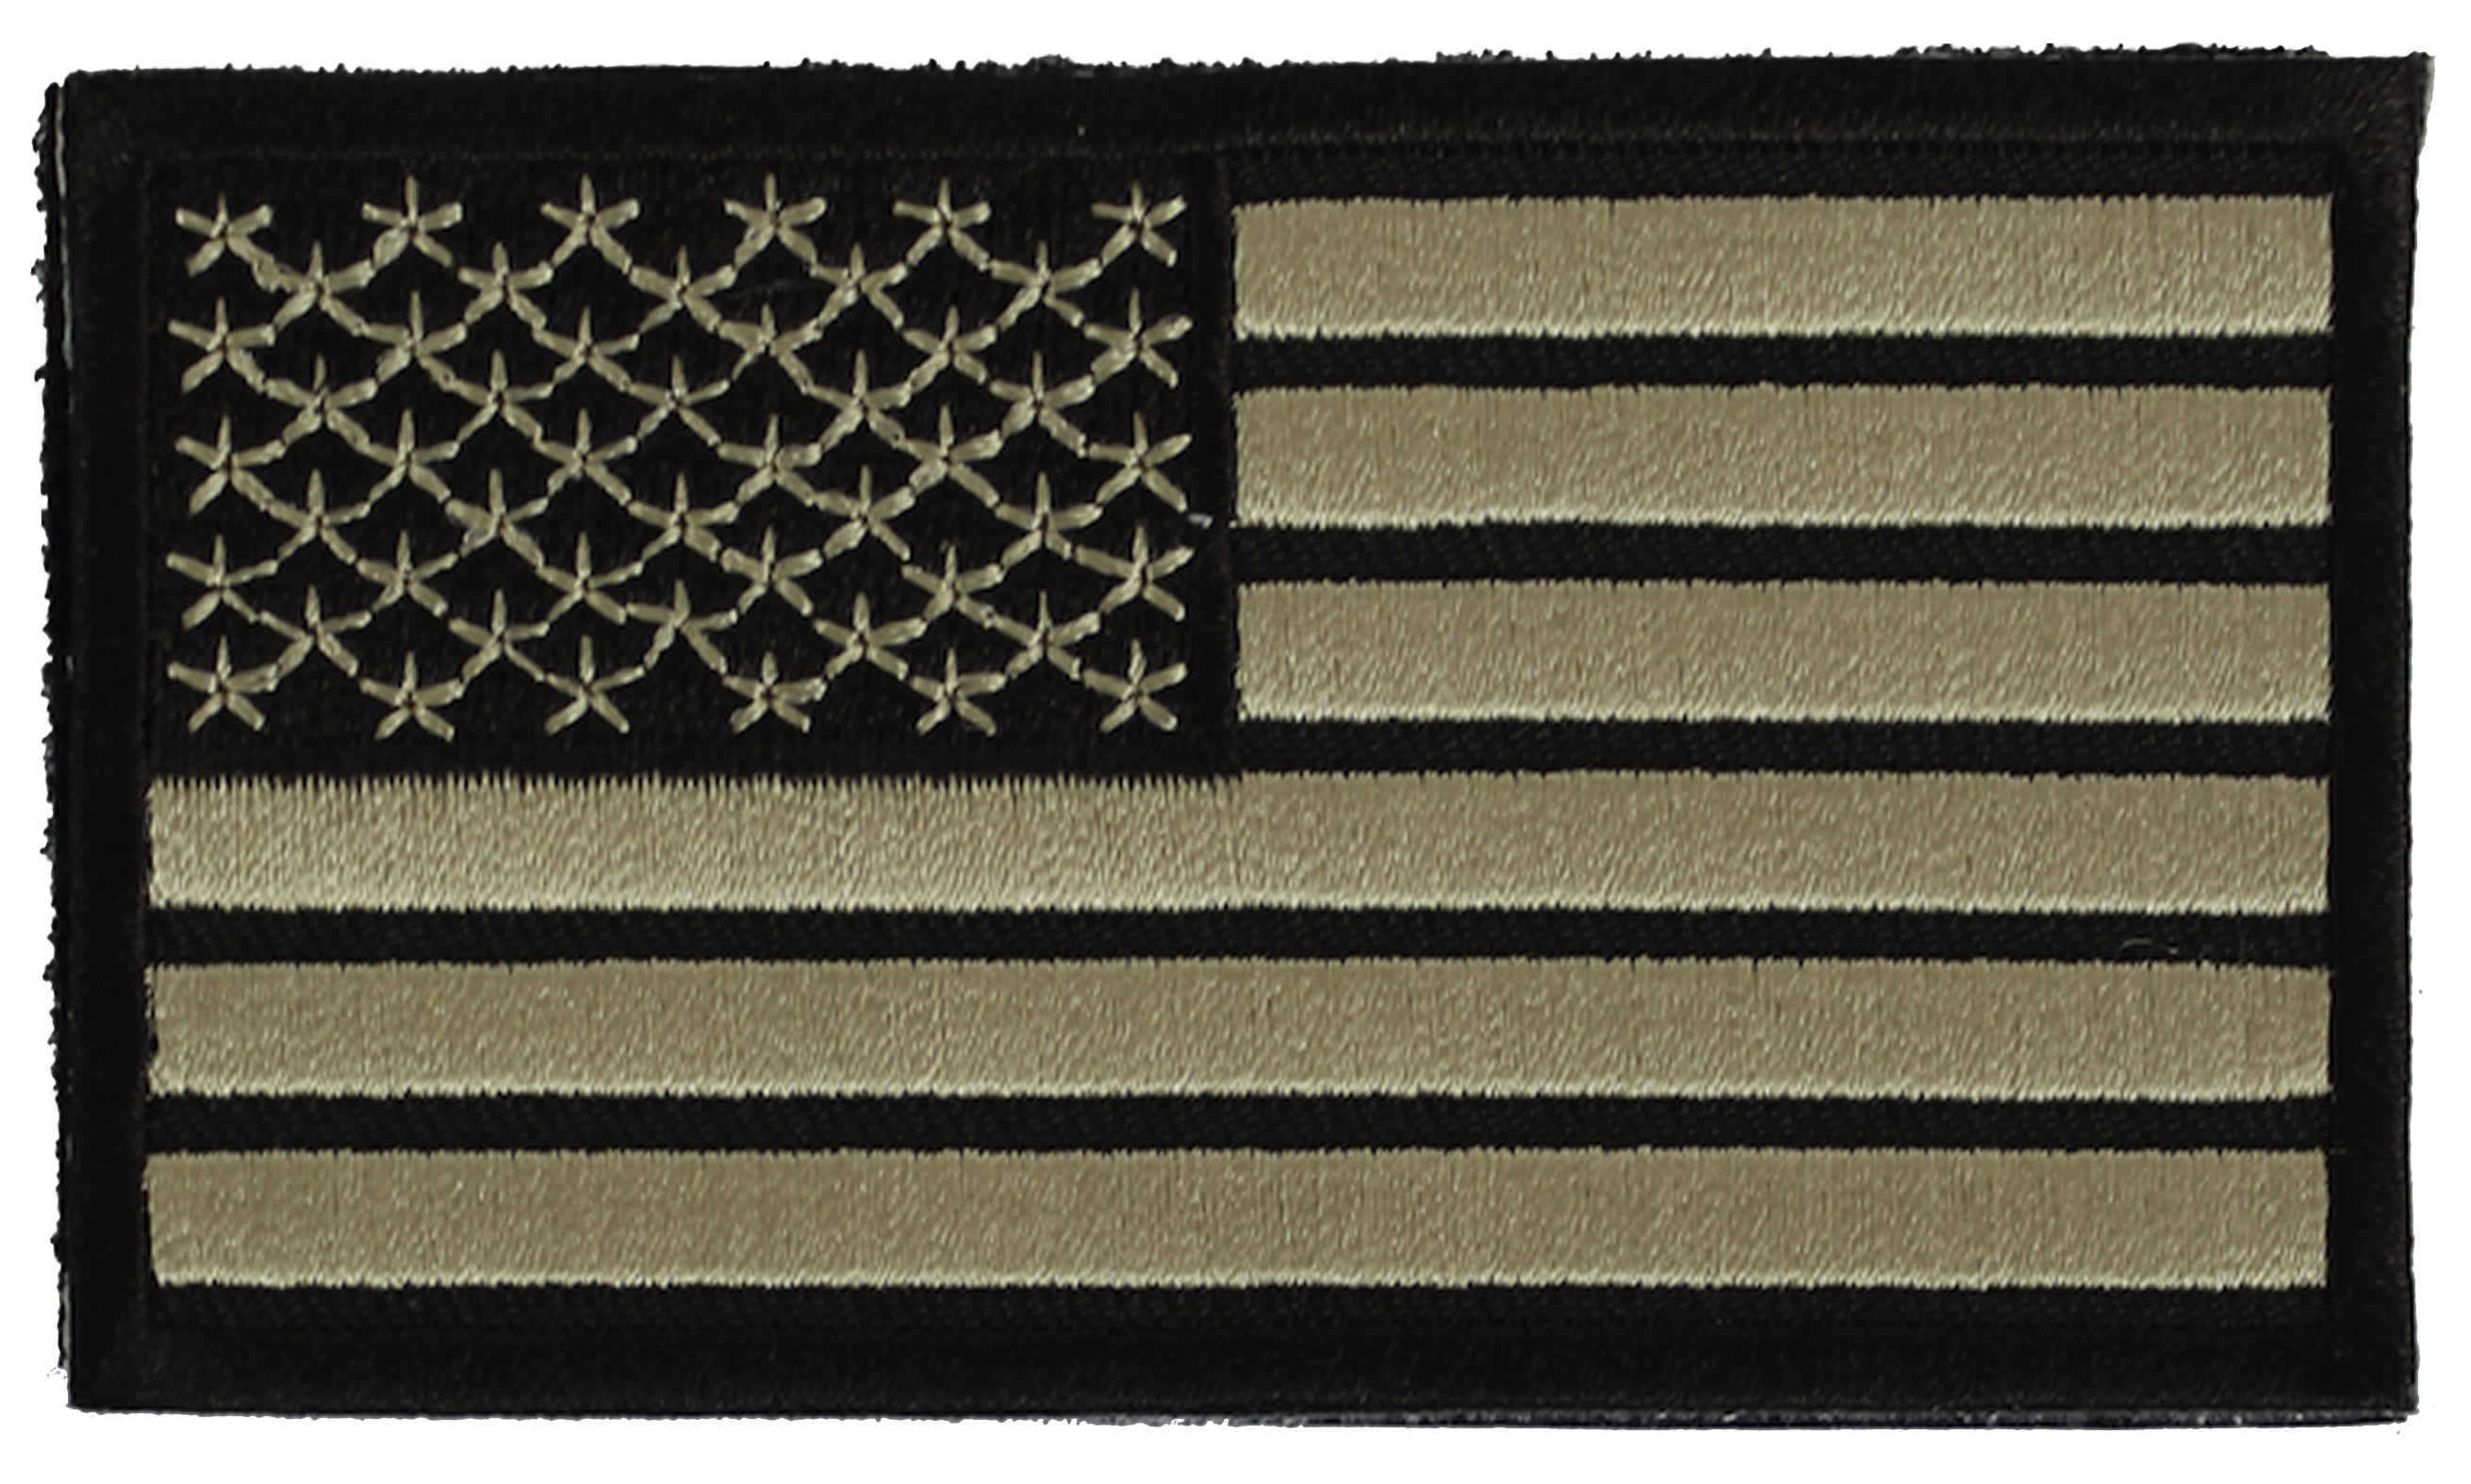 Spec Ops Tactical Patch